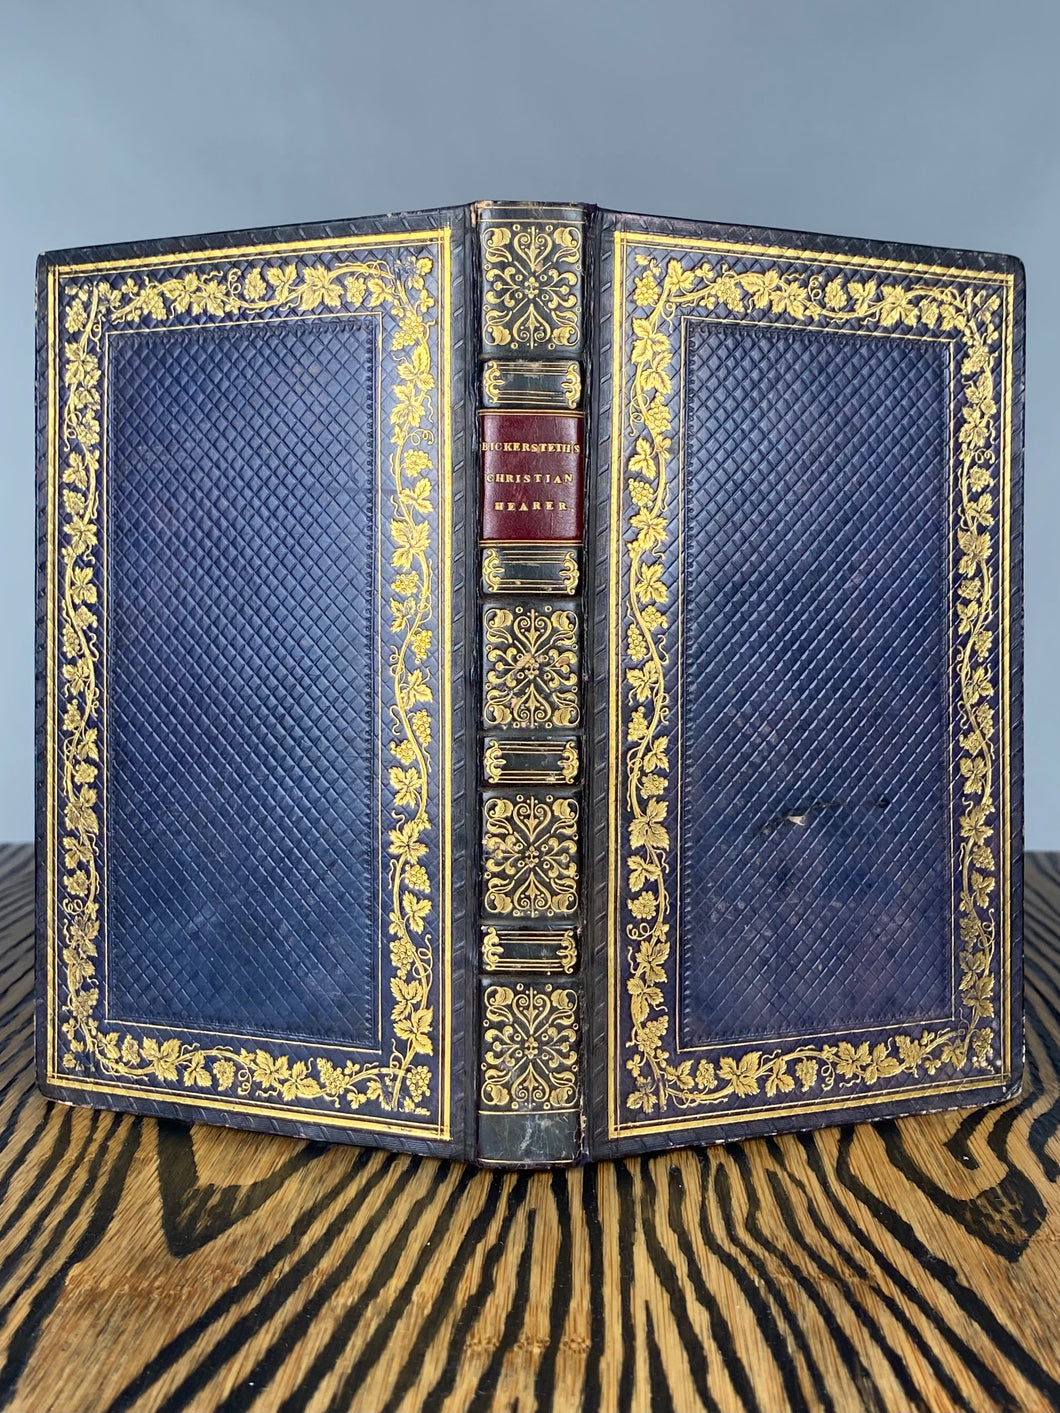 1828 EDWARD BICKERSTETH - On Rightly Hearing the Preaching of the Word of God. Superb & Fine Binding.